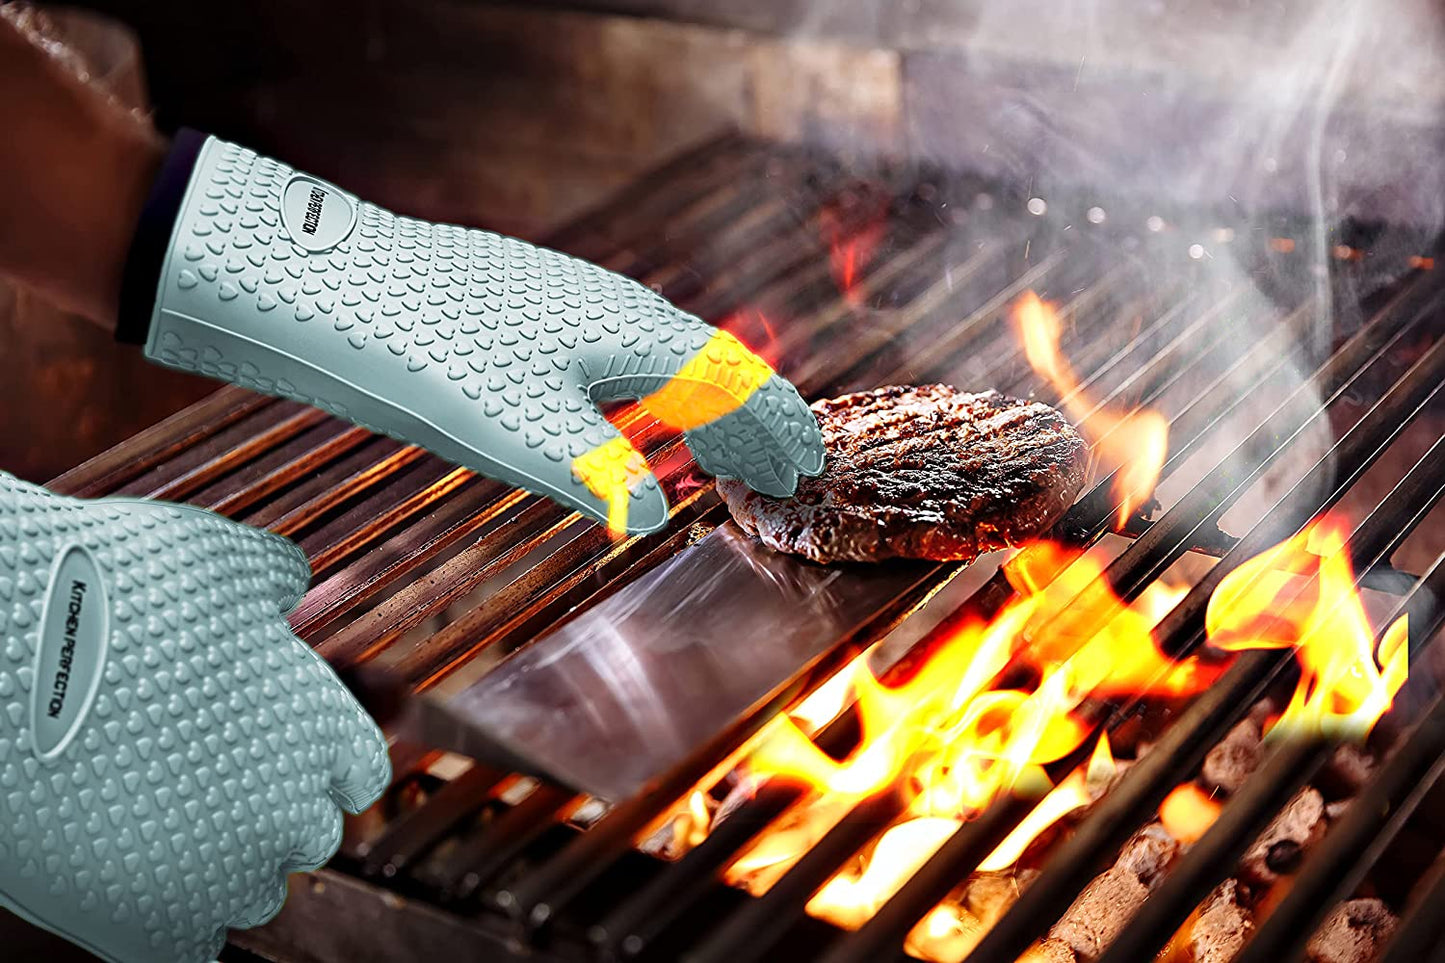 KITCHEN PERFECTION Silicone Smoker Oven Gloves -Extreme Heat Resistant BBQ Gloves-Handle Hot Food Right on Your Grill Fryer &Pit|Waterproof Grilling Cooking Baking Mitts|Superior Value Set +3 Bonuses